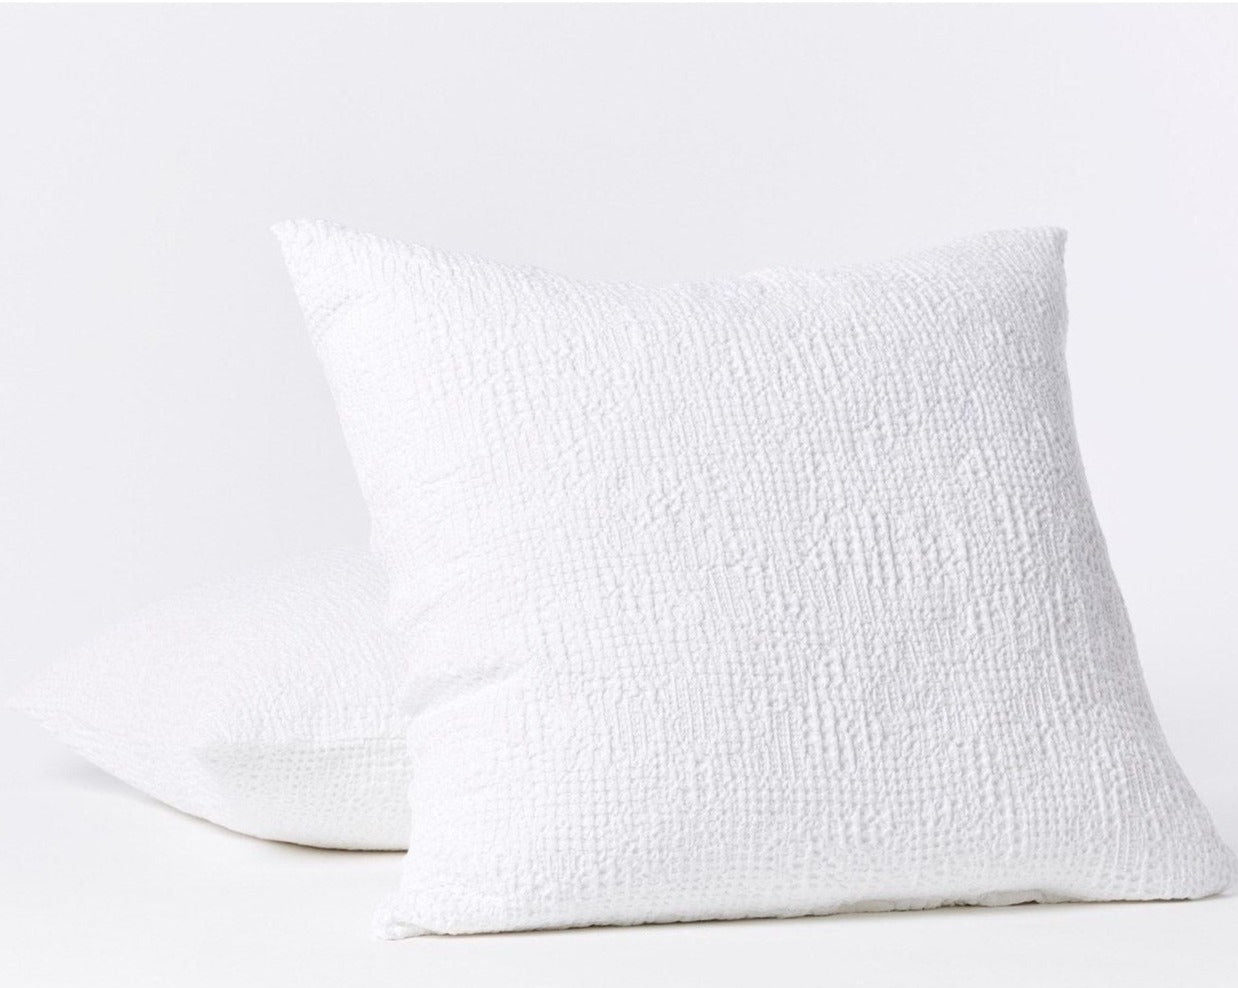 These organic cotton shams are warm yet light, patterned yet soft and comfortable next to your skin.